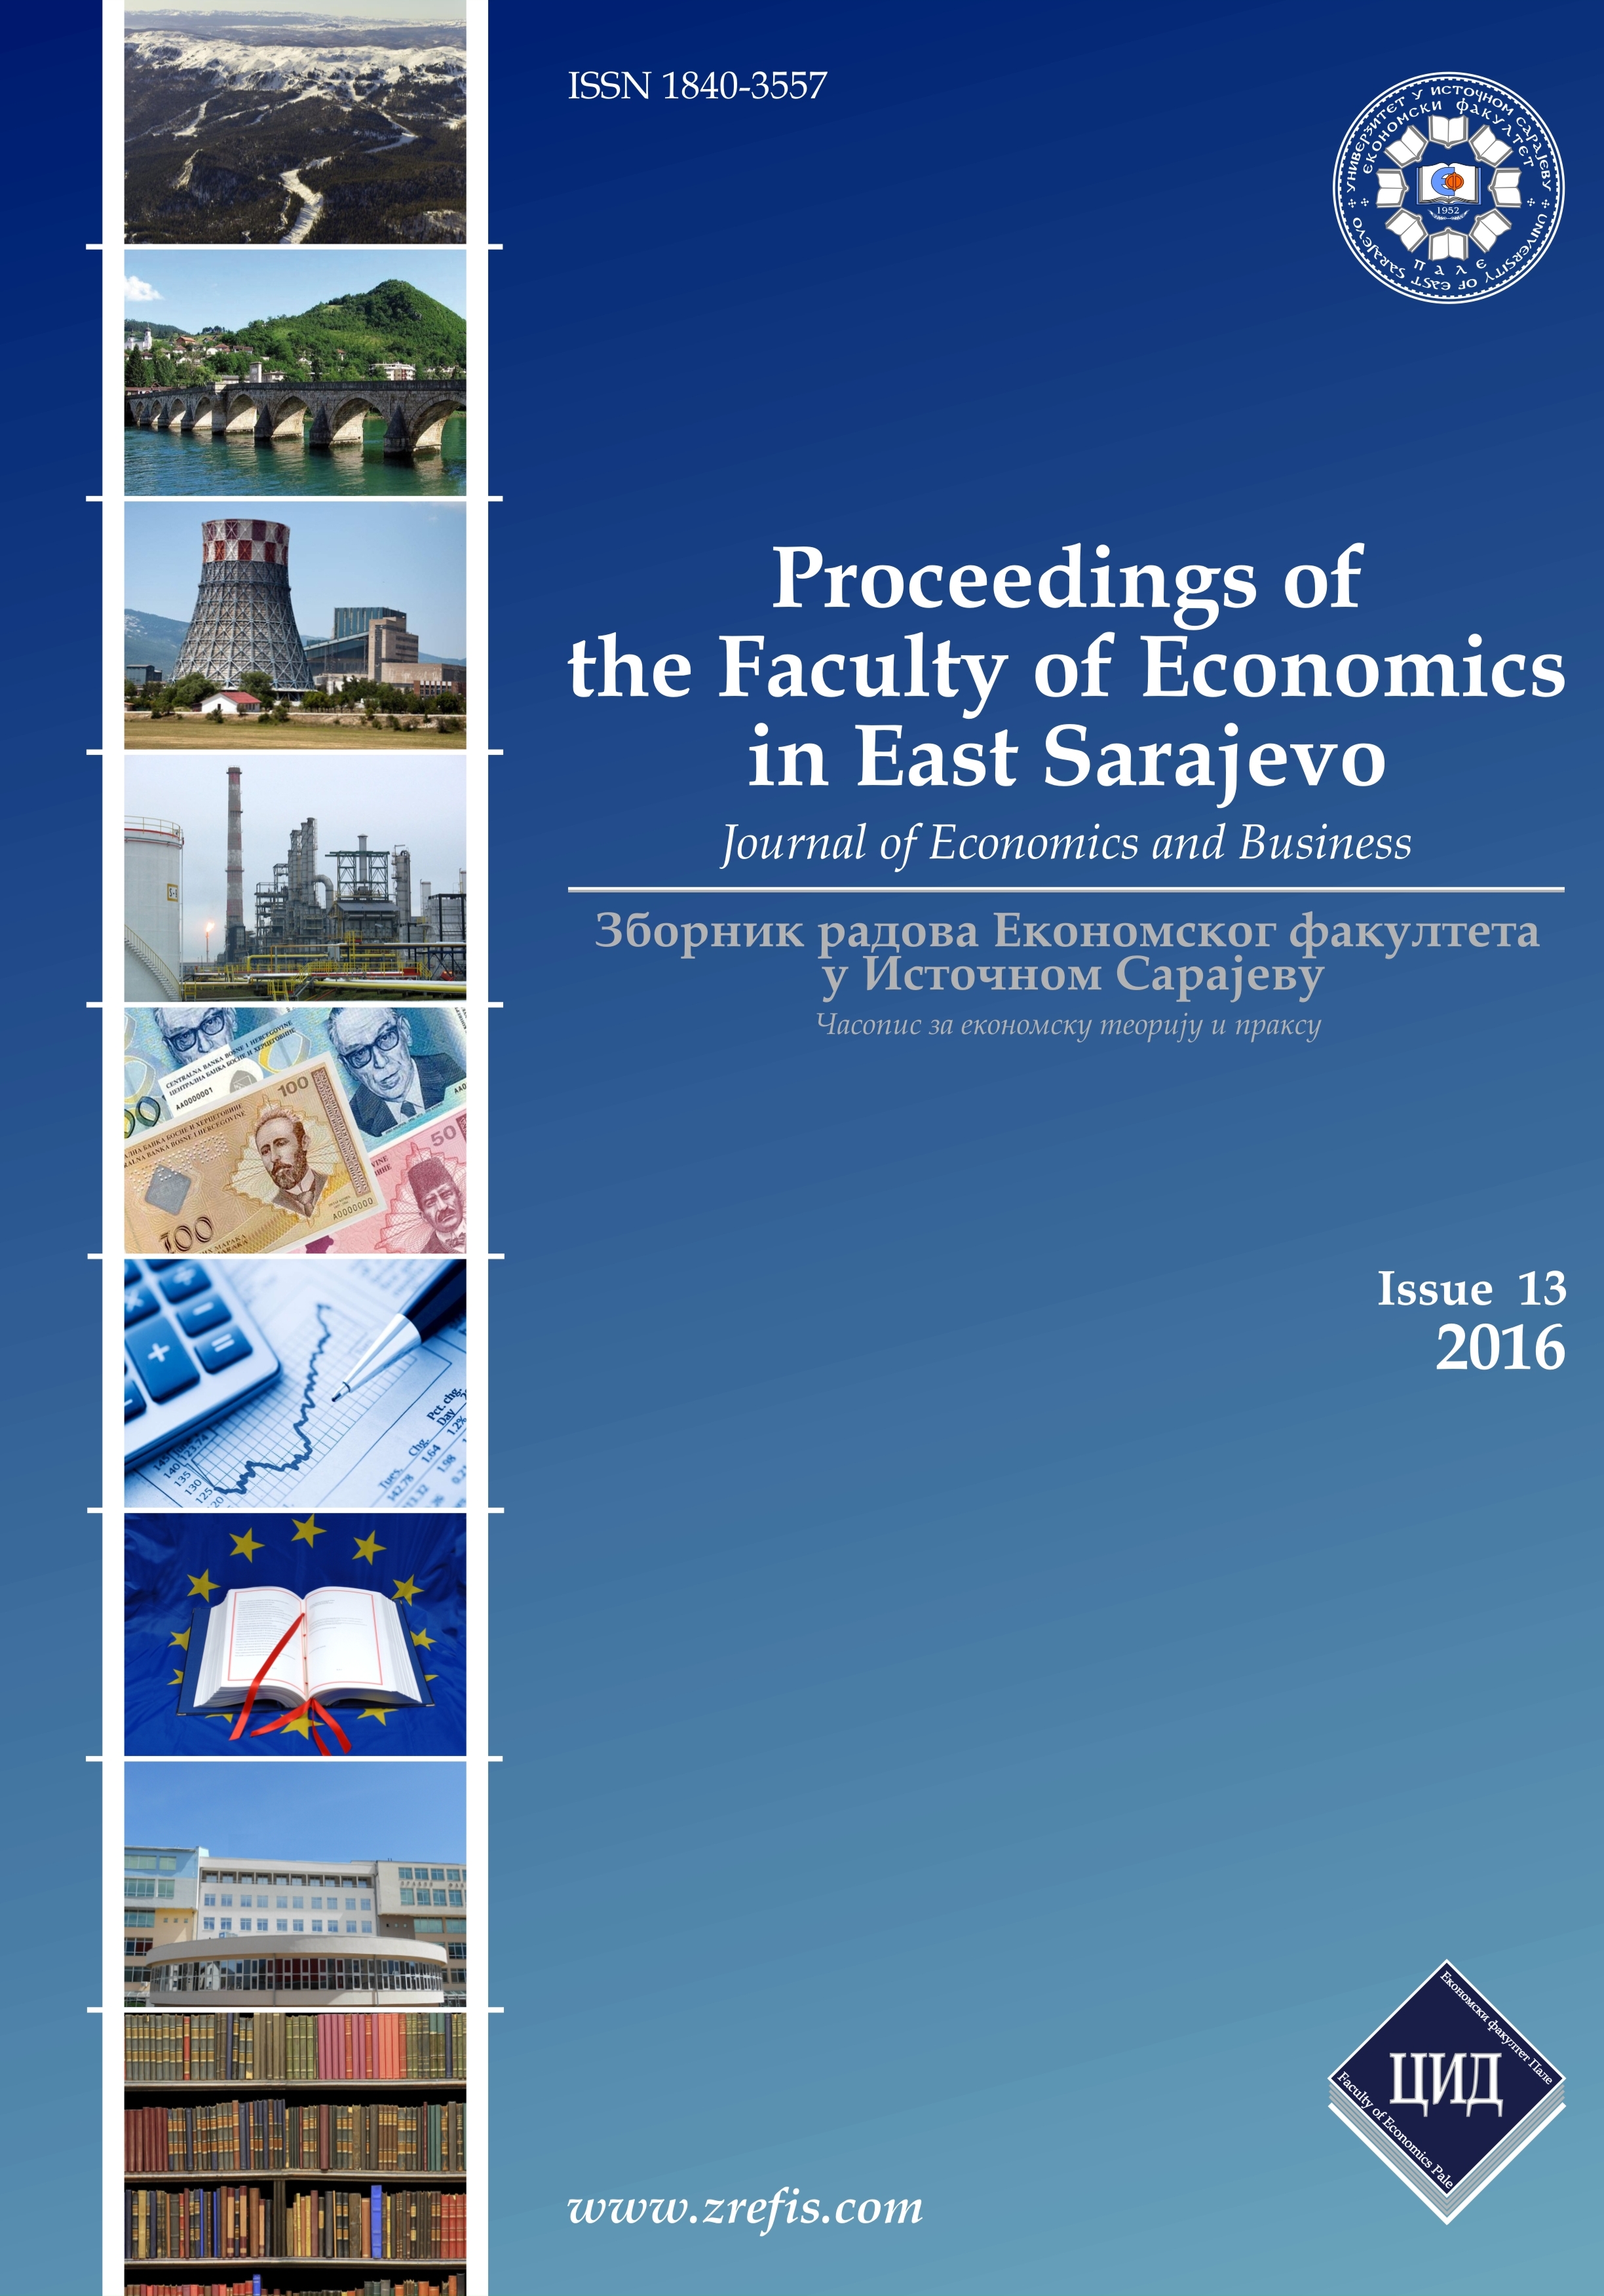 INFLUENCE OF THE CEFTA 2006 AGREEMENT ON BIH ECONOMY Cover Image